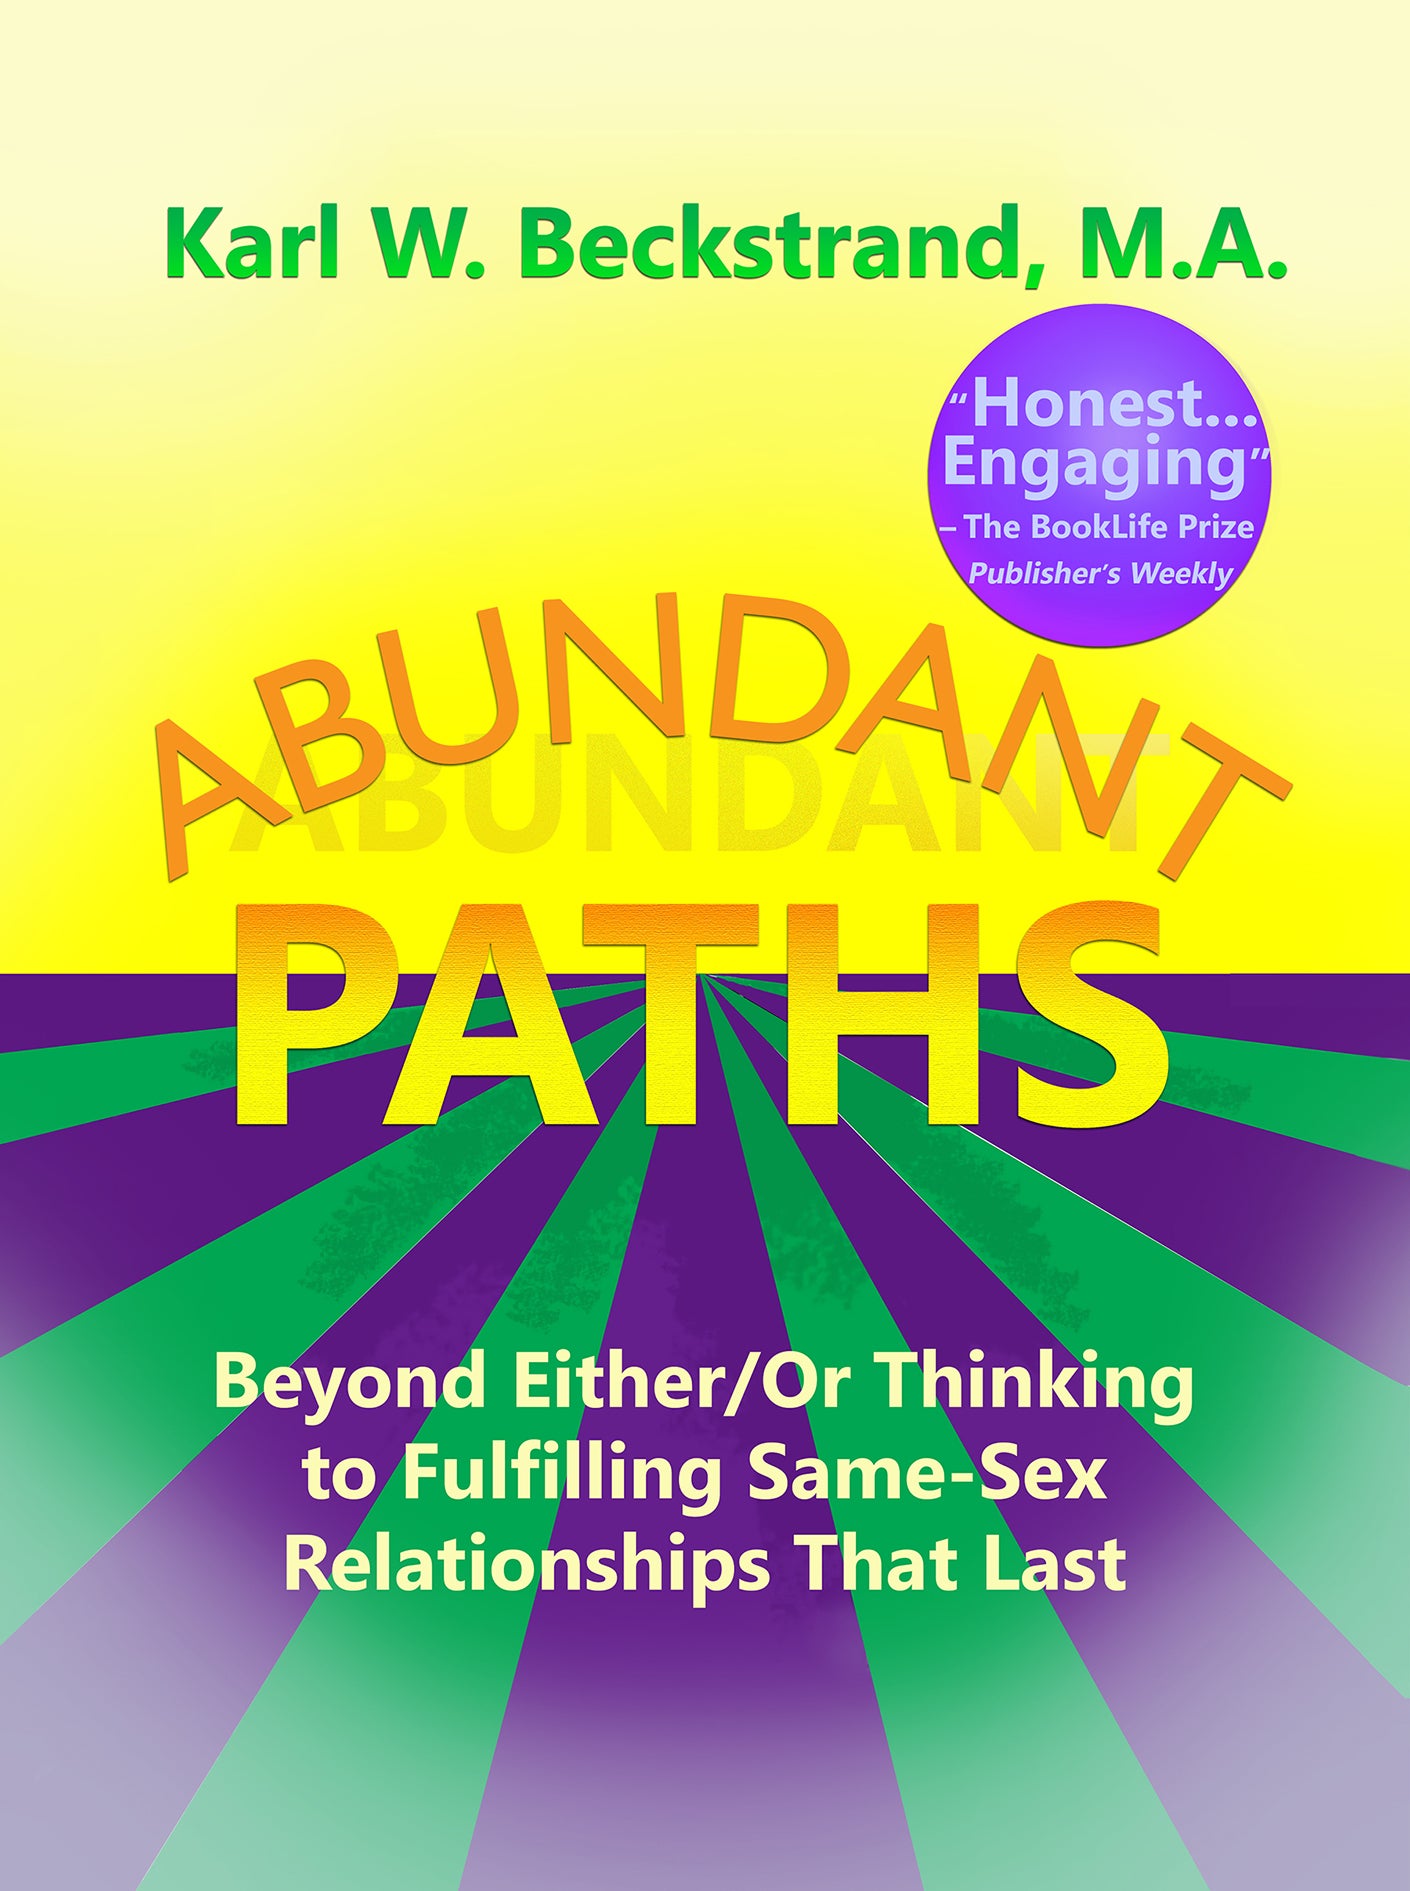 Abundant Paths: Beyond Either/Or Thinking to Fulfilling Same-Sex Relationships That Last